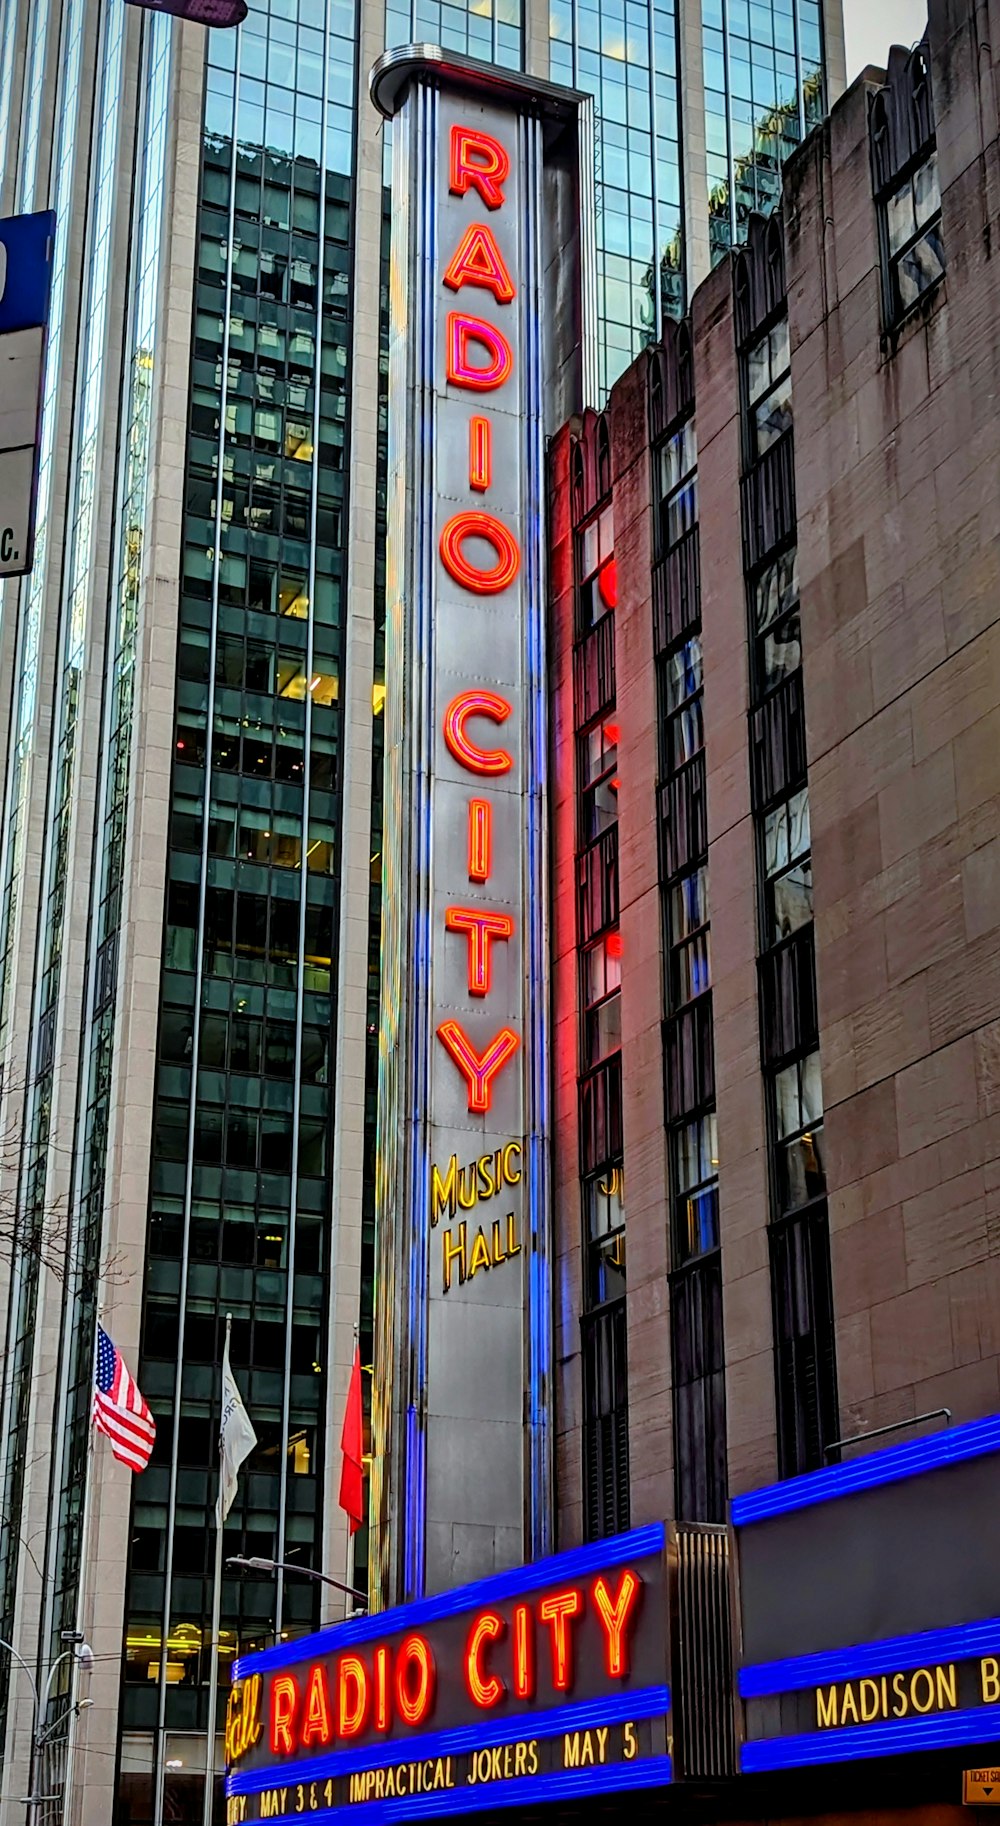 the radio city sign is lit up in red, white, and blue